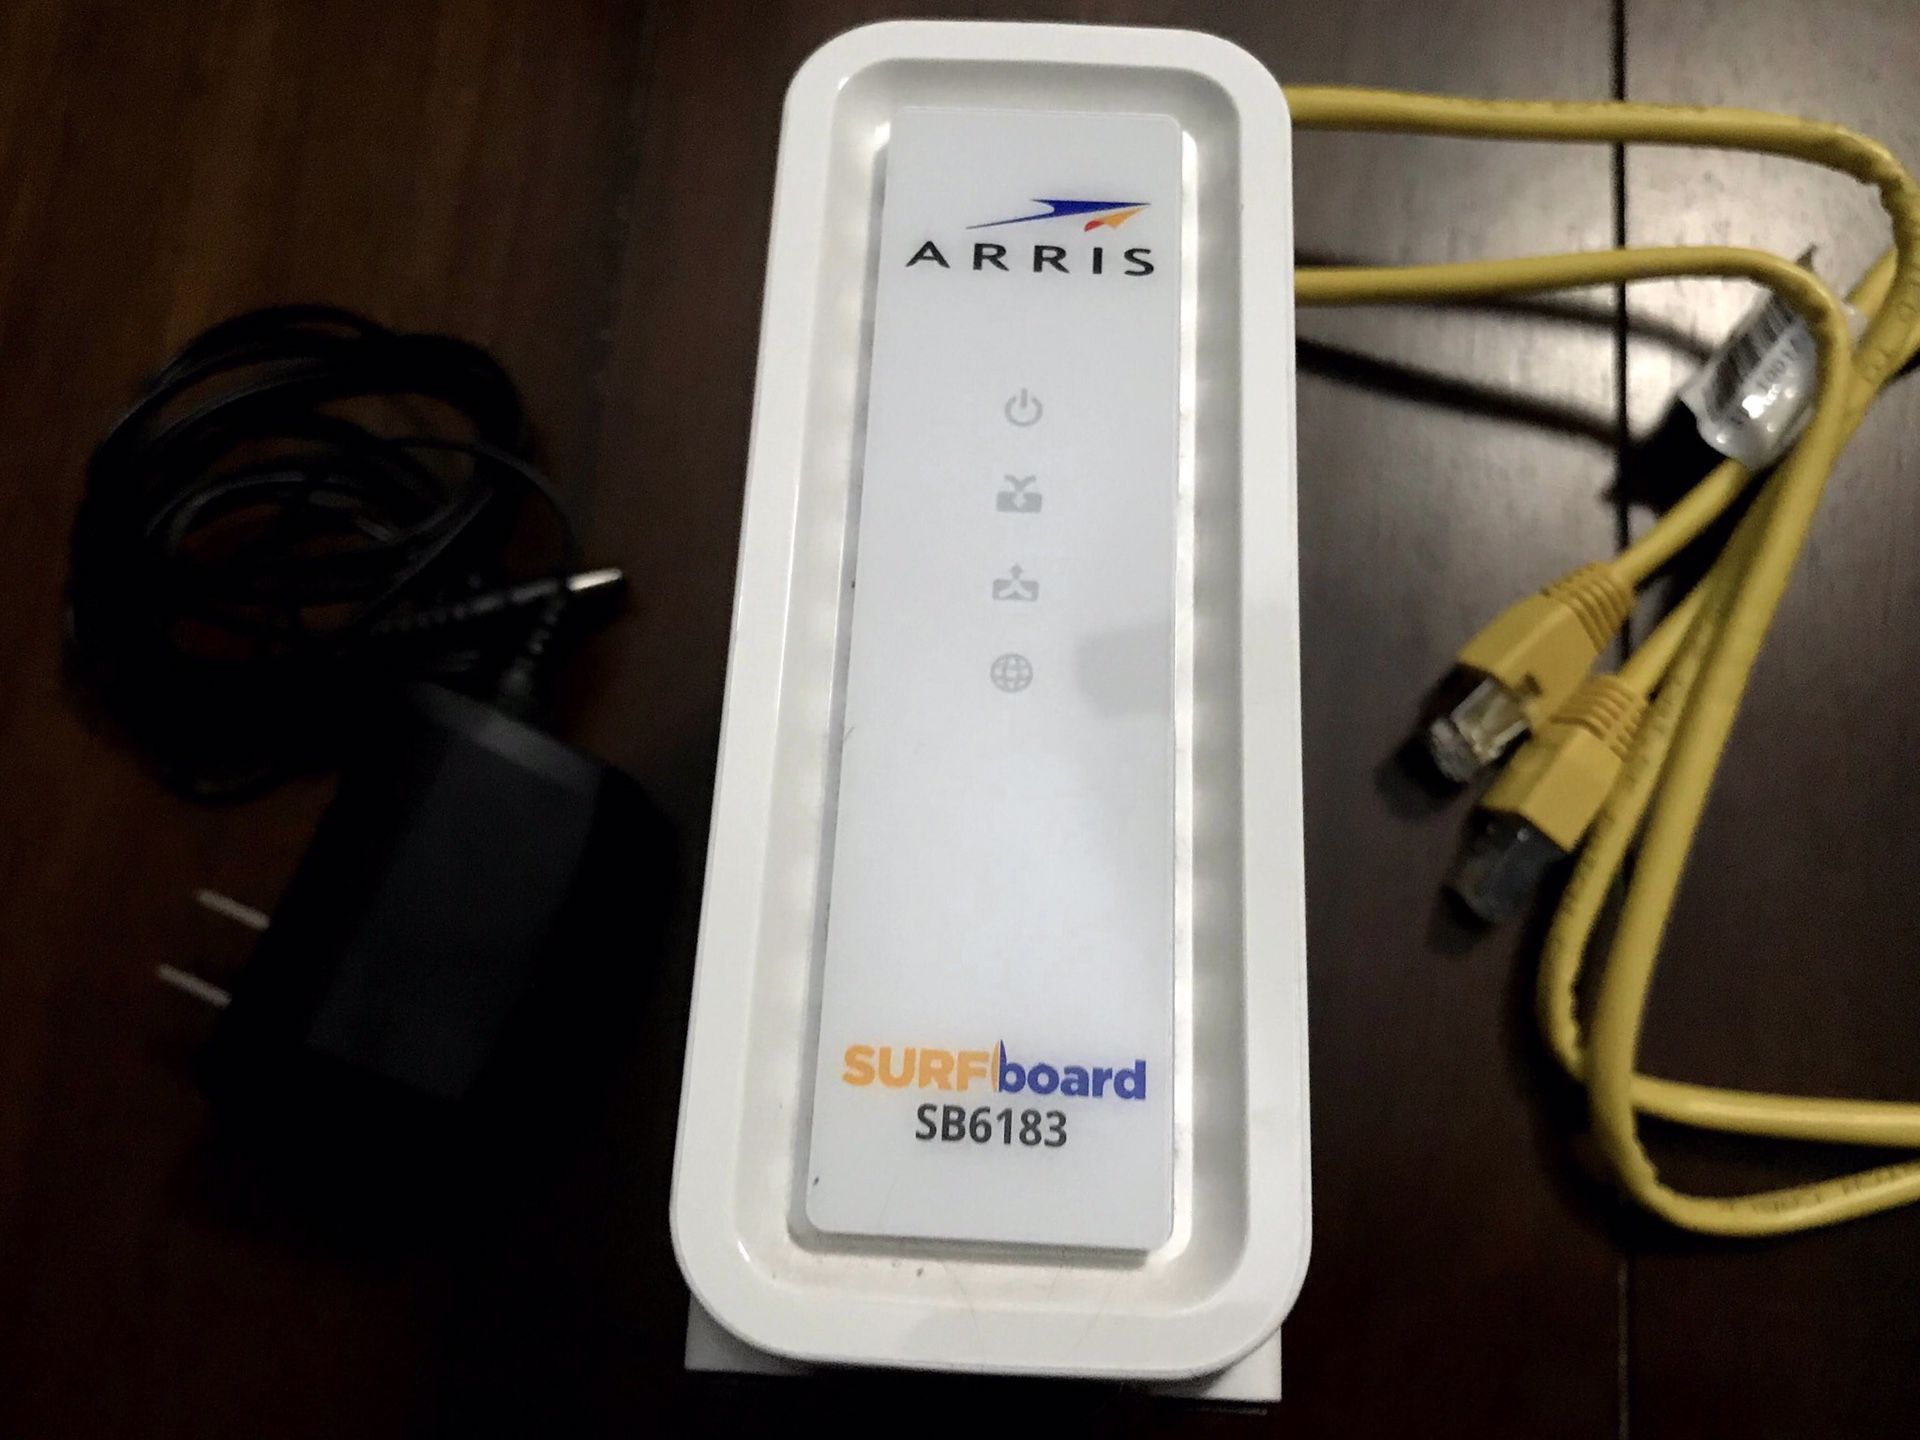 ARRIS - SURFboard 16 x 4 DOCSIS 3.0 Cable Modem Model SB6183 Approved for Cox, Spectrum, Xfinity & others (White)